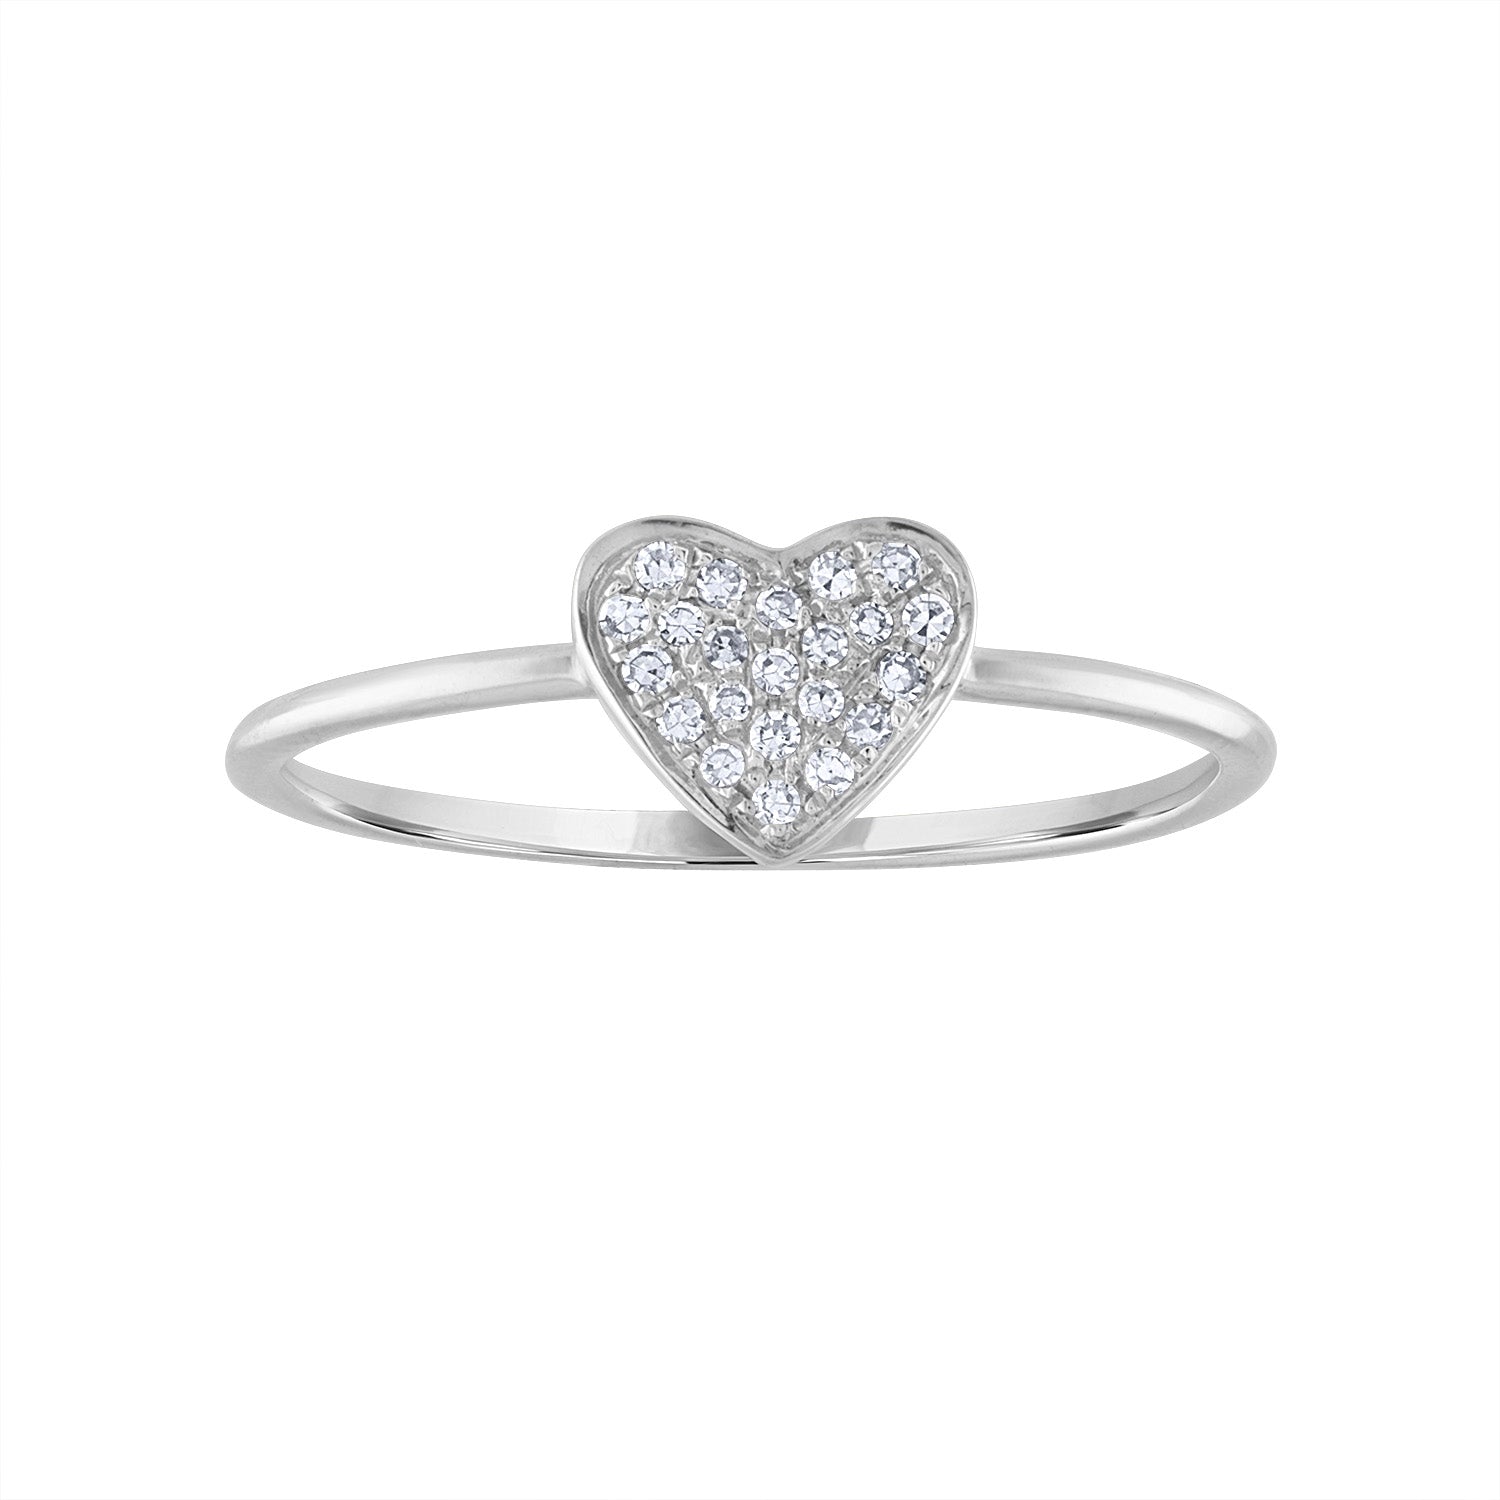 14KT GOLD DIAMOND PAVE HEART RING